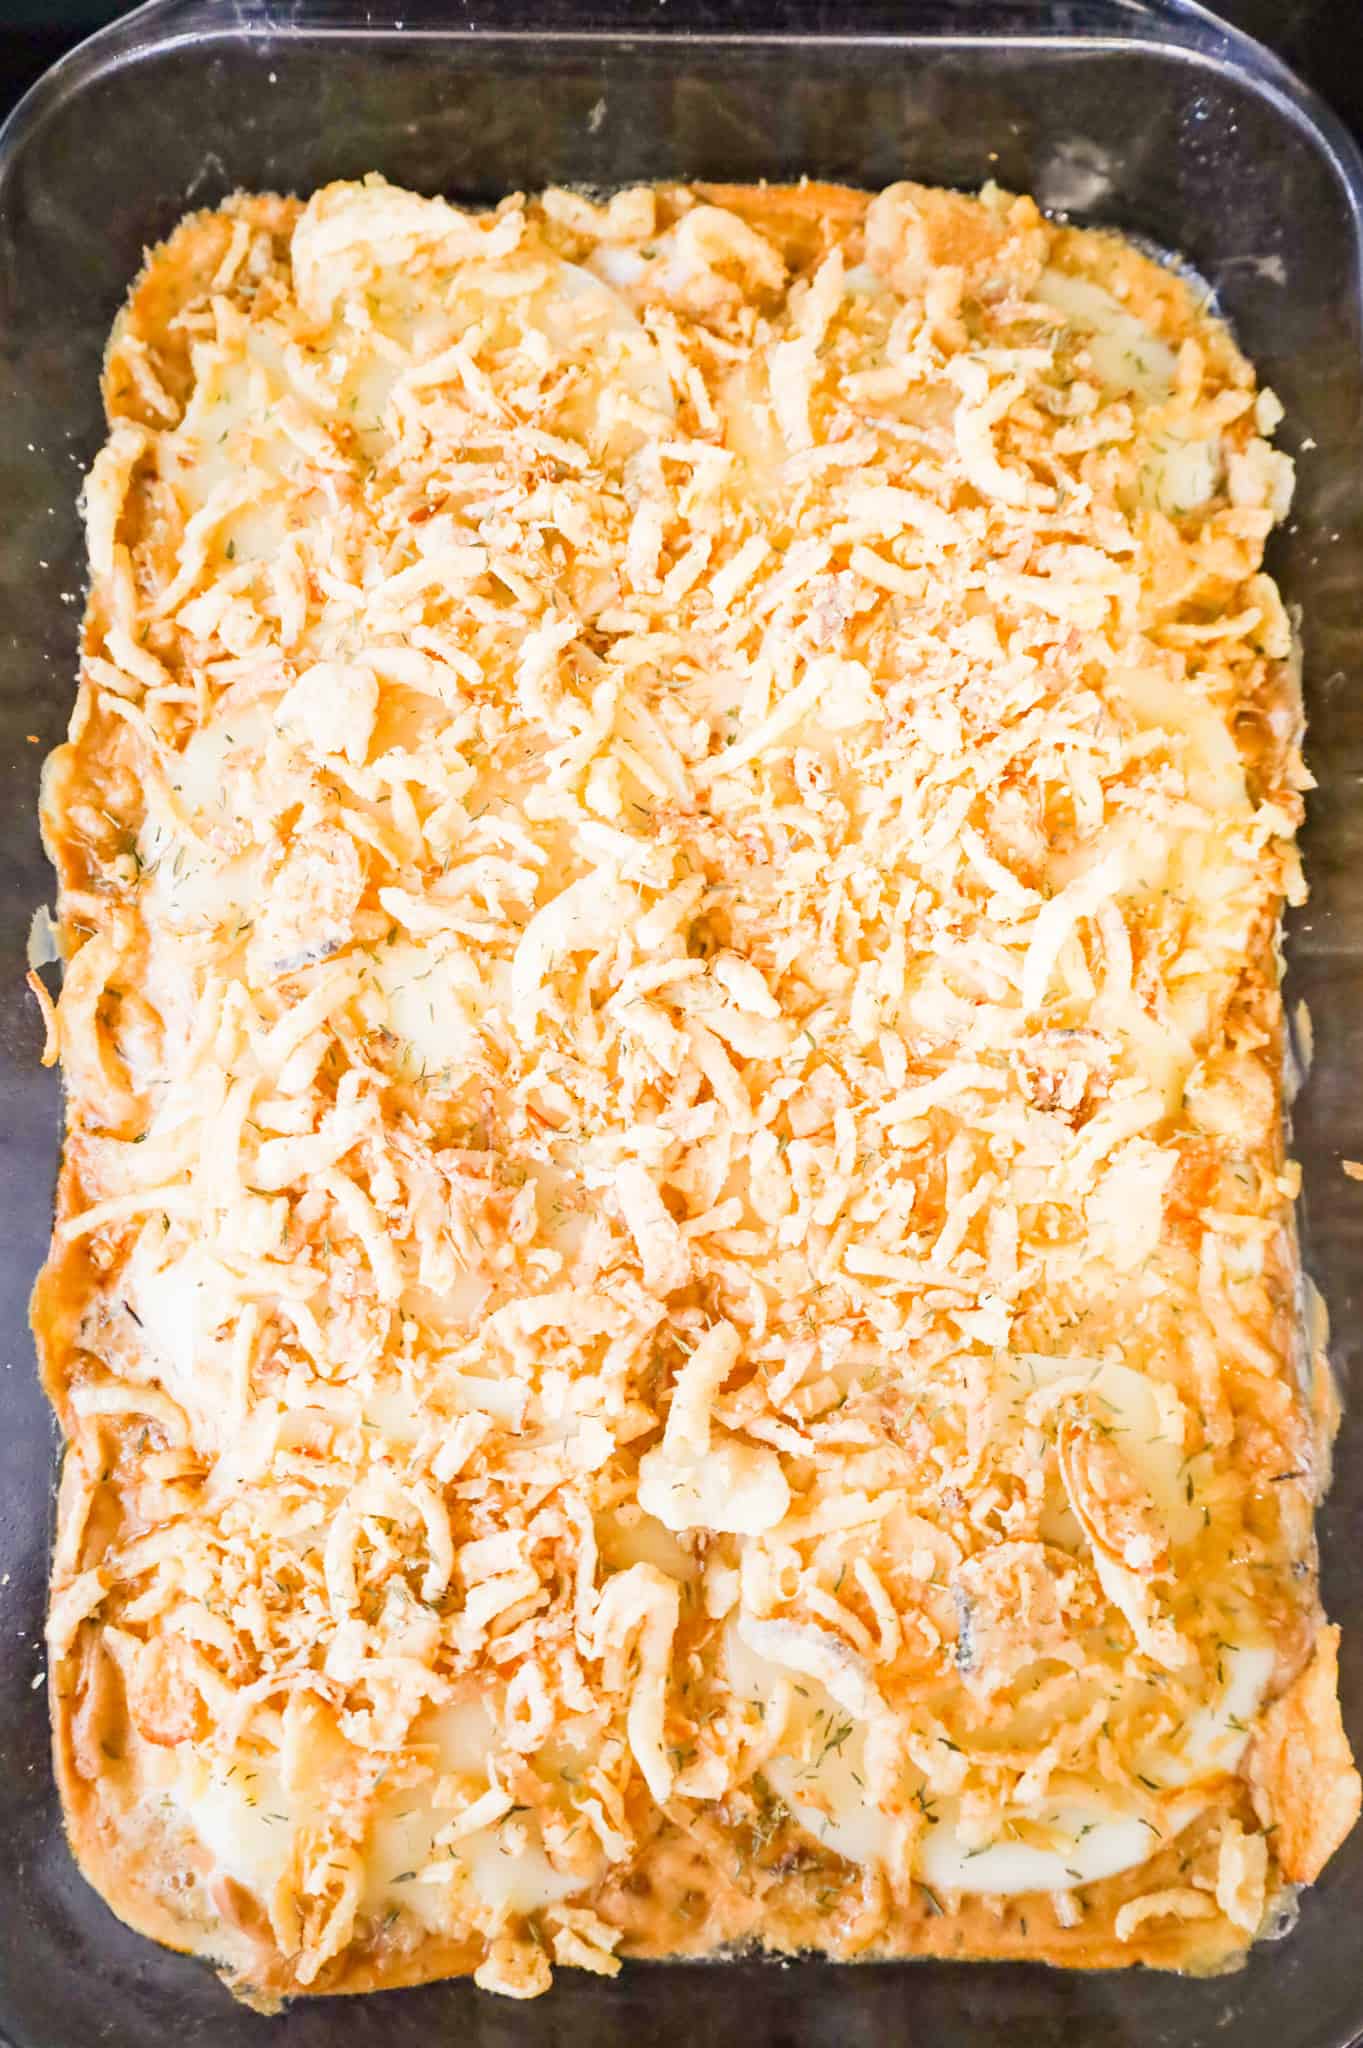 crispy fried onions and cheese on top of pork chops in a baking dish